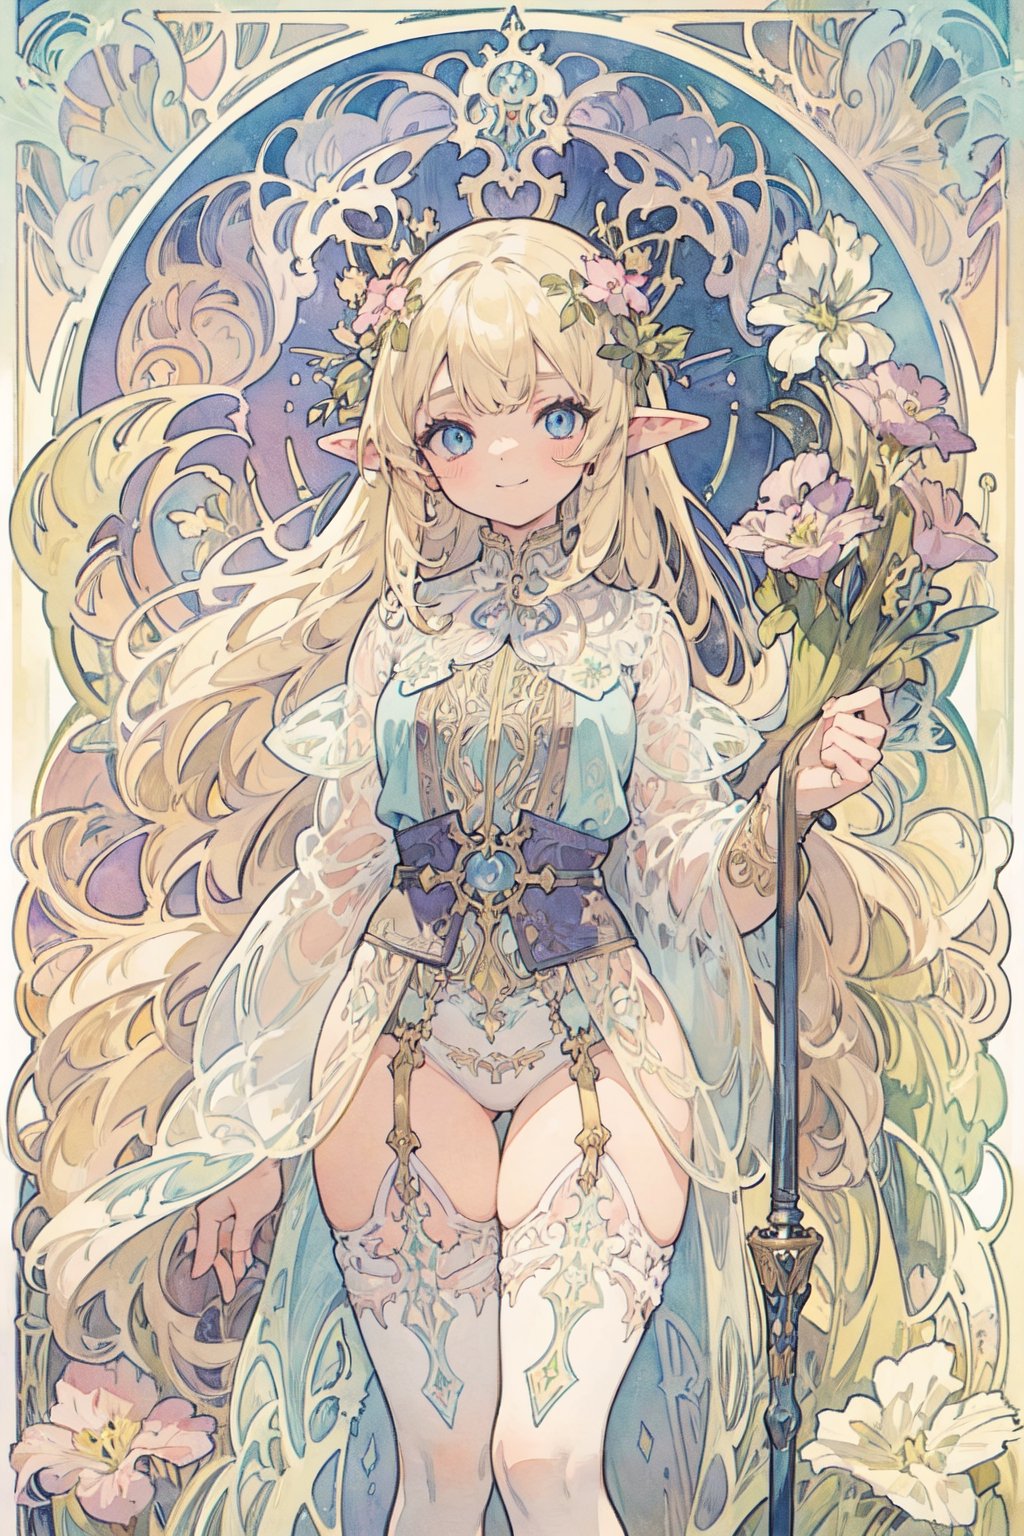 (masterpiece, best quality, highly detailed, ultra-detailed, intricate), illustration, pastel colors, art_nouveau, Art Nouveau by Alphonse Mucha, tarot, A teenage female elf, blonde hair, blue eyes, wearing lingerie, see-through, carrying a cane in her hand, is smiling, (A cute cat next to her),full of innocence, innocence and no fear. The Fool card represents a new beginning, new adventures and challenges, and a spirit of faith, courage, and optimism,watercolor,masterpiece